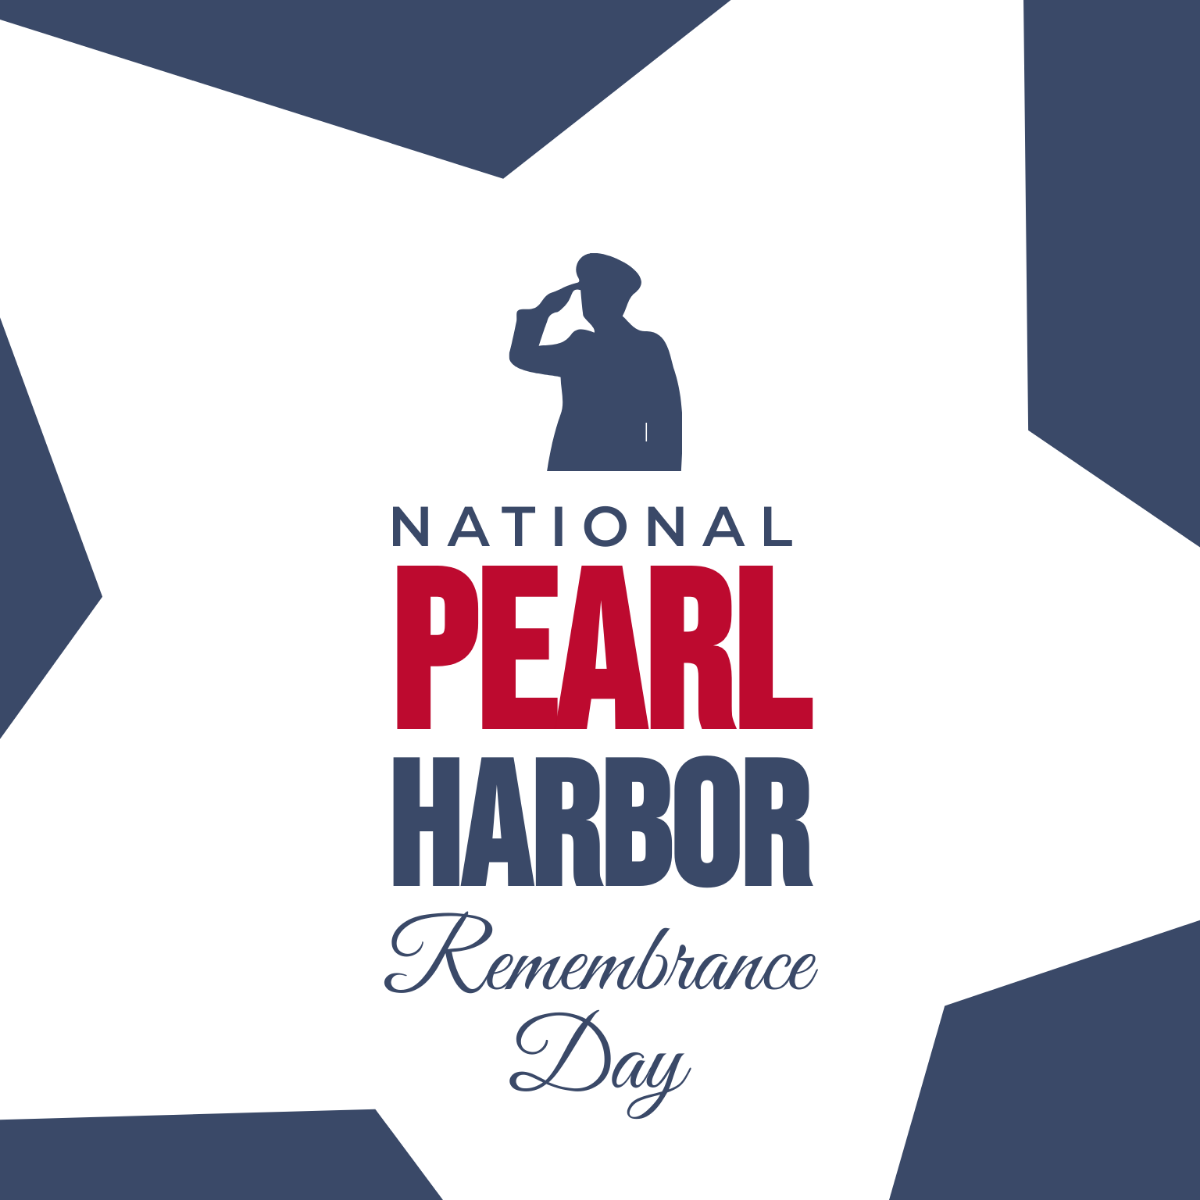 National Pearl Harbor Remembrance Day Illustration Template